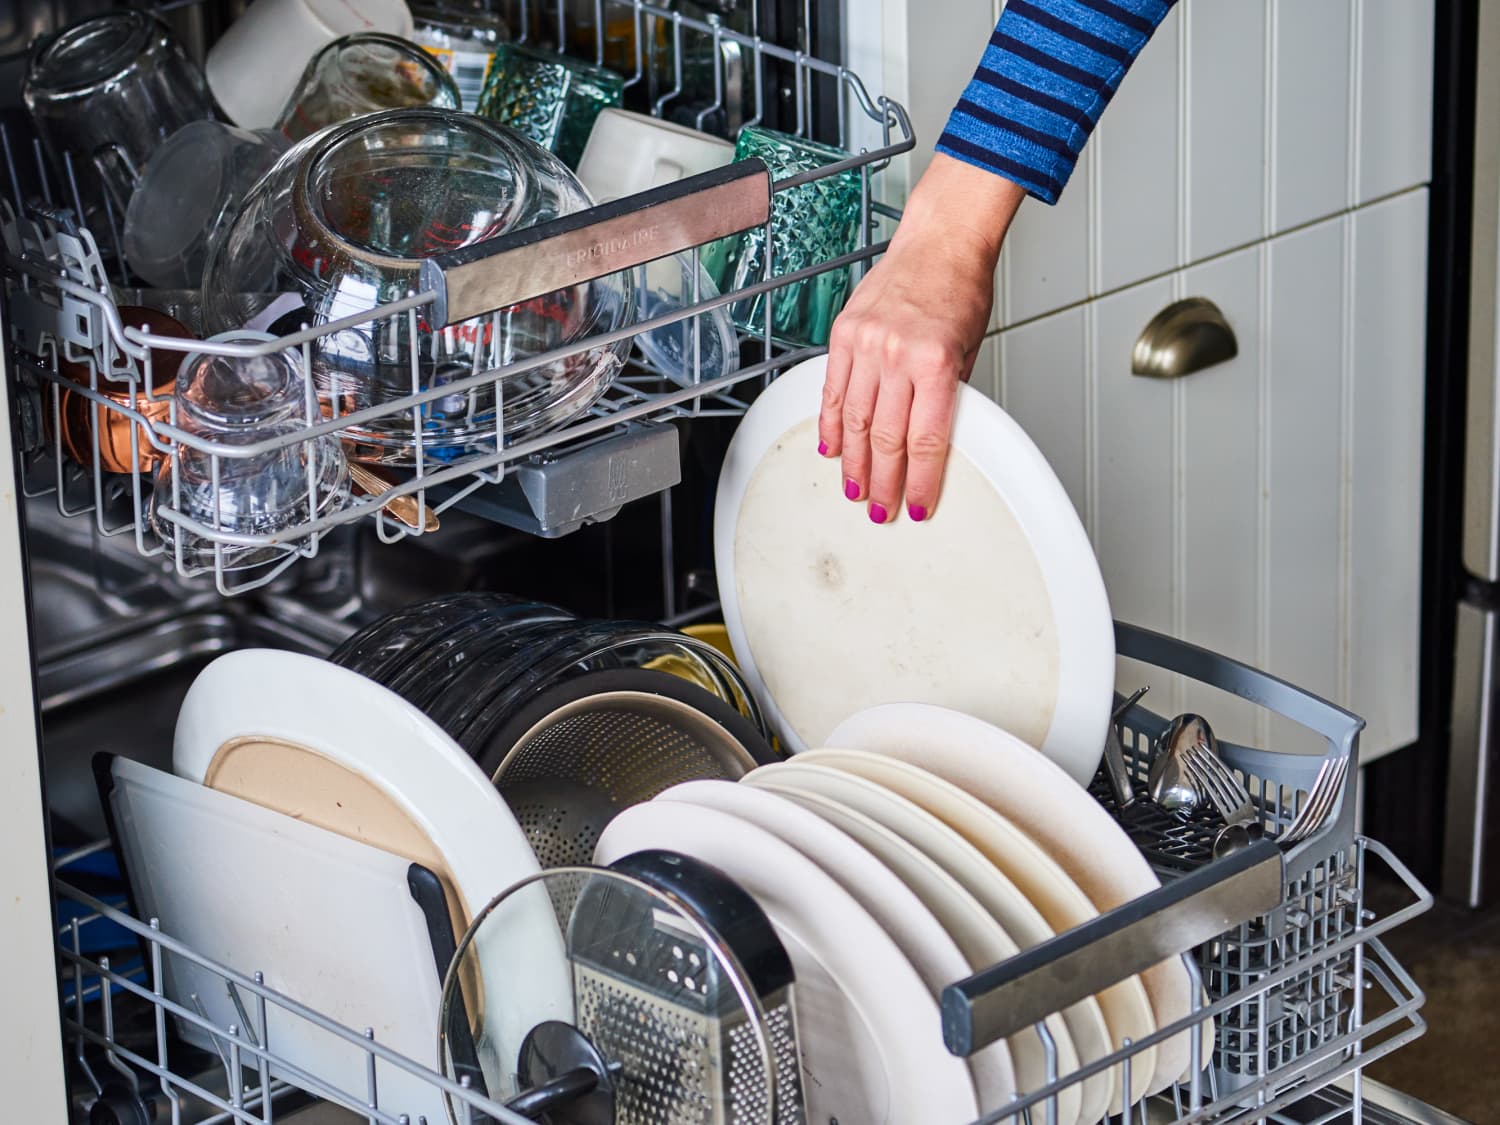 How To Tell How Old A Dishwasher Is 5 Things You Didn't Know About Your Dishwasher | Kitchn